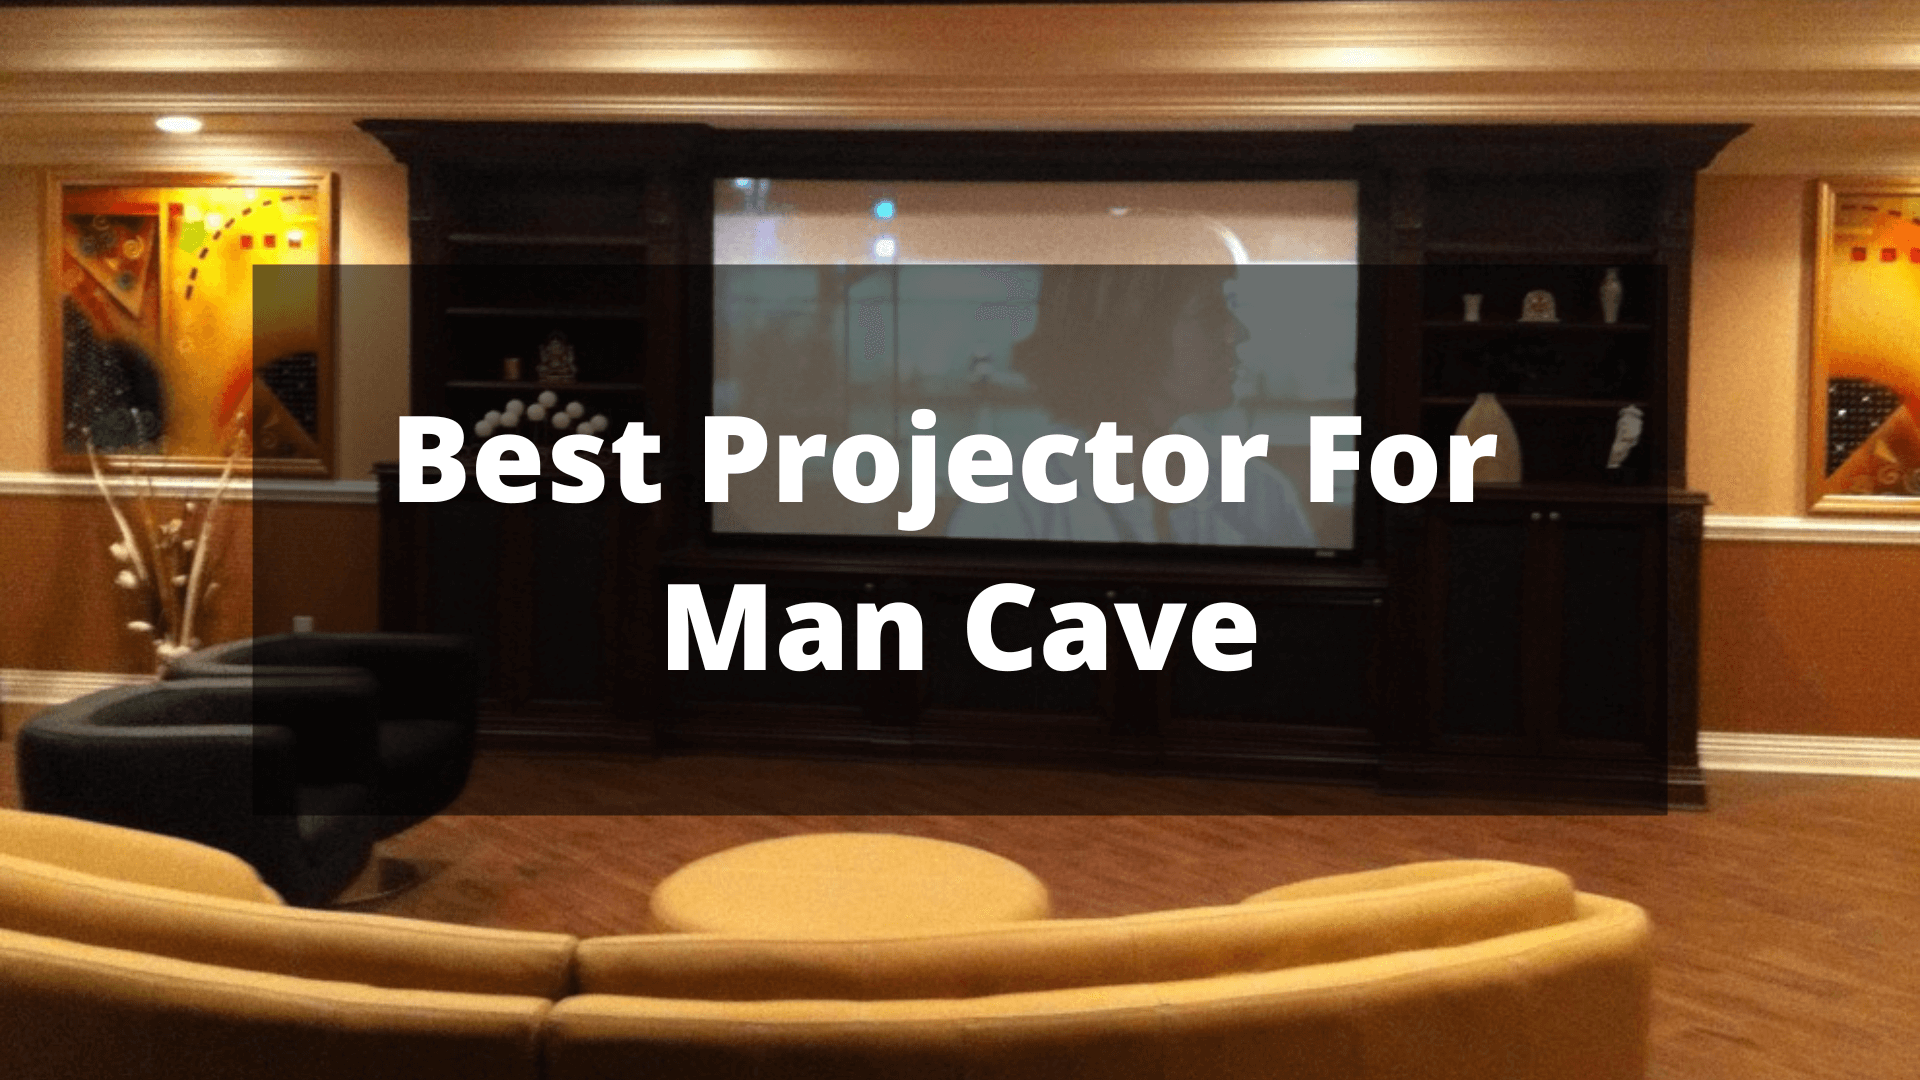 Best Projector For Man Cave